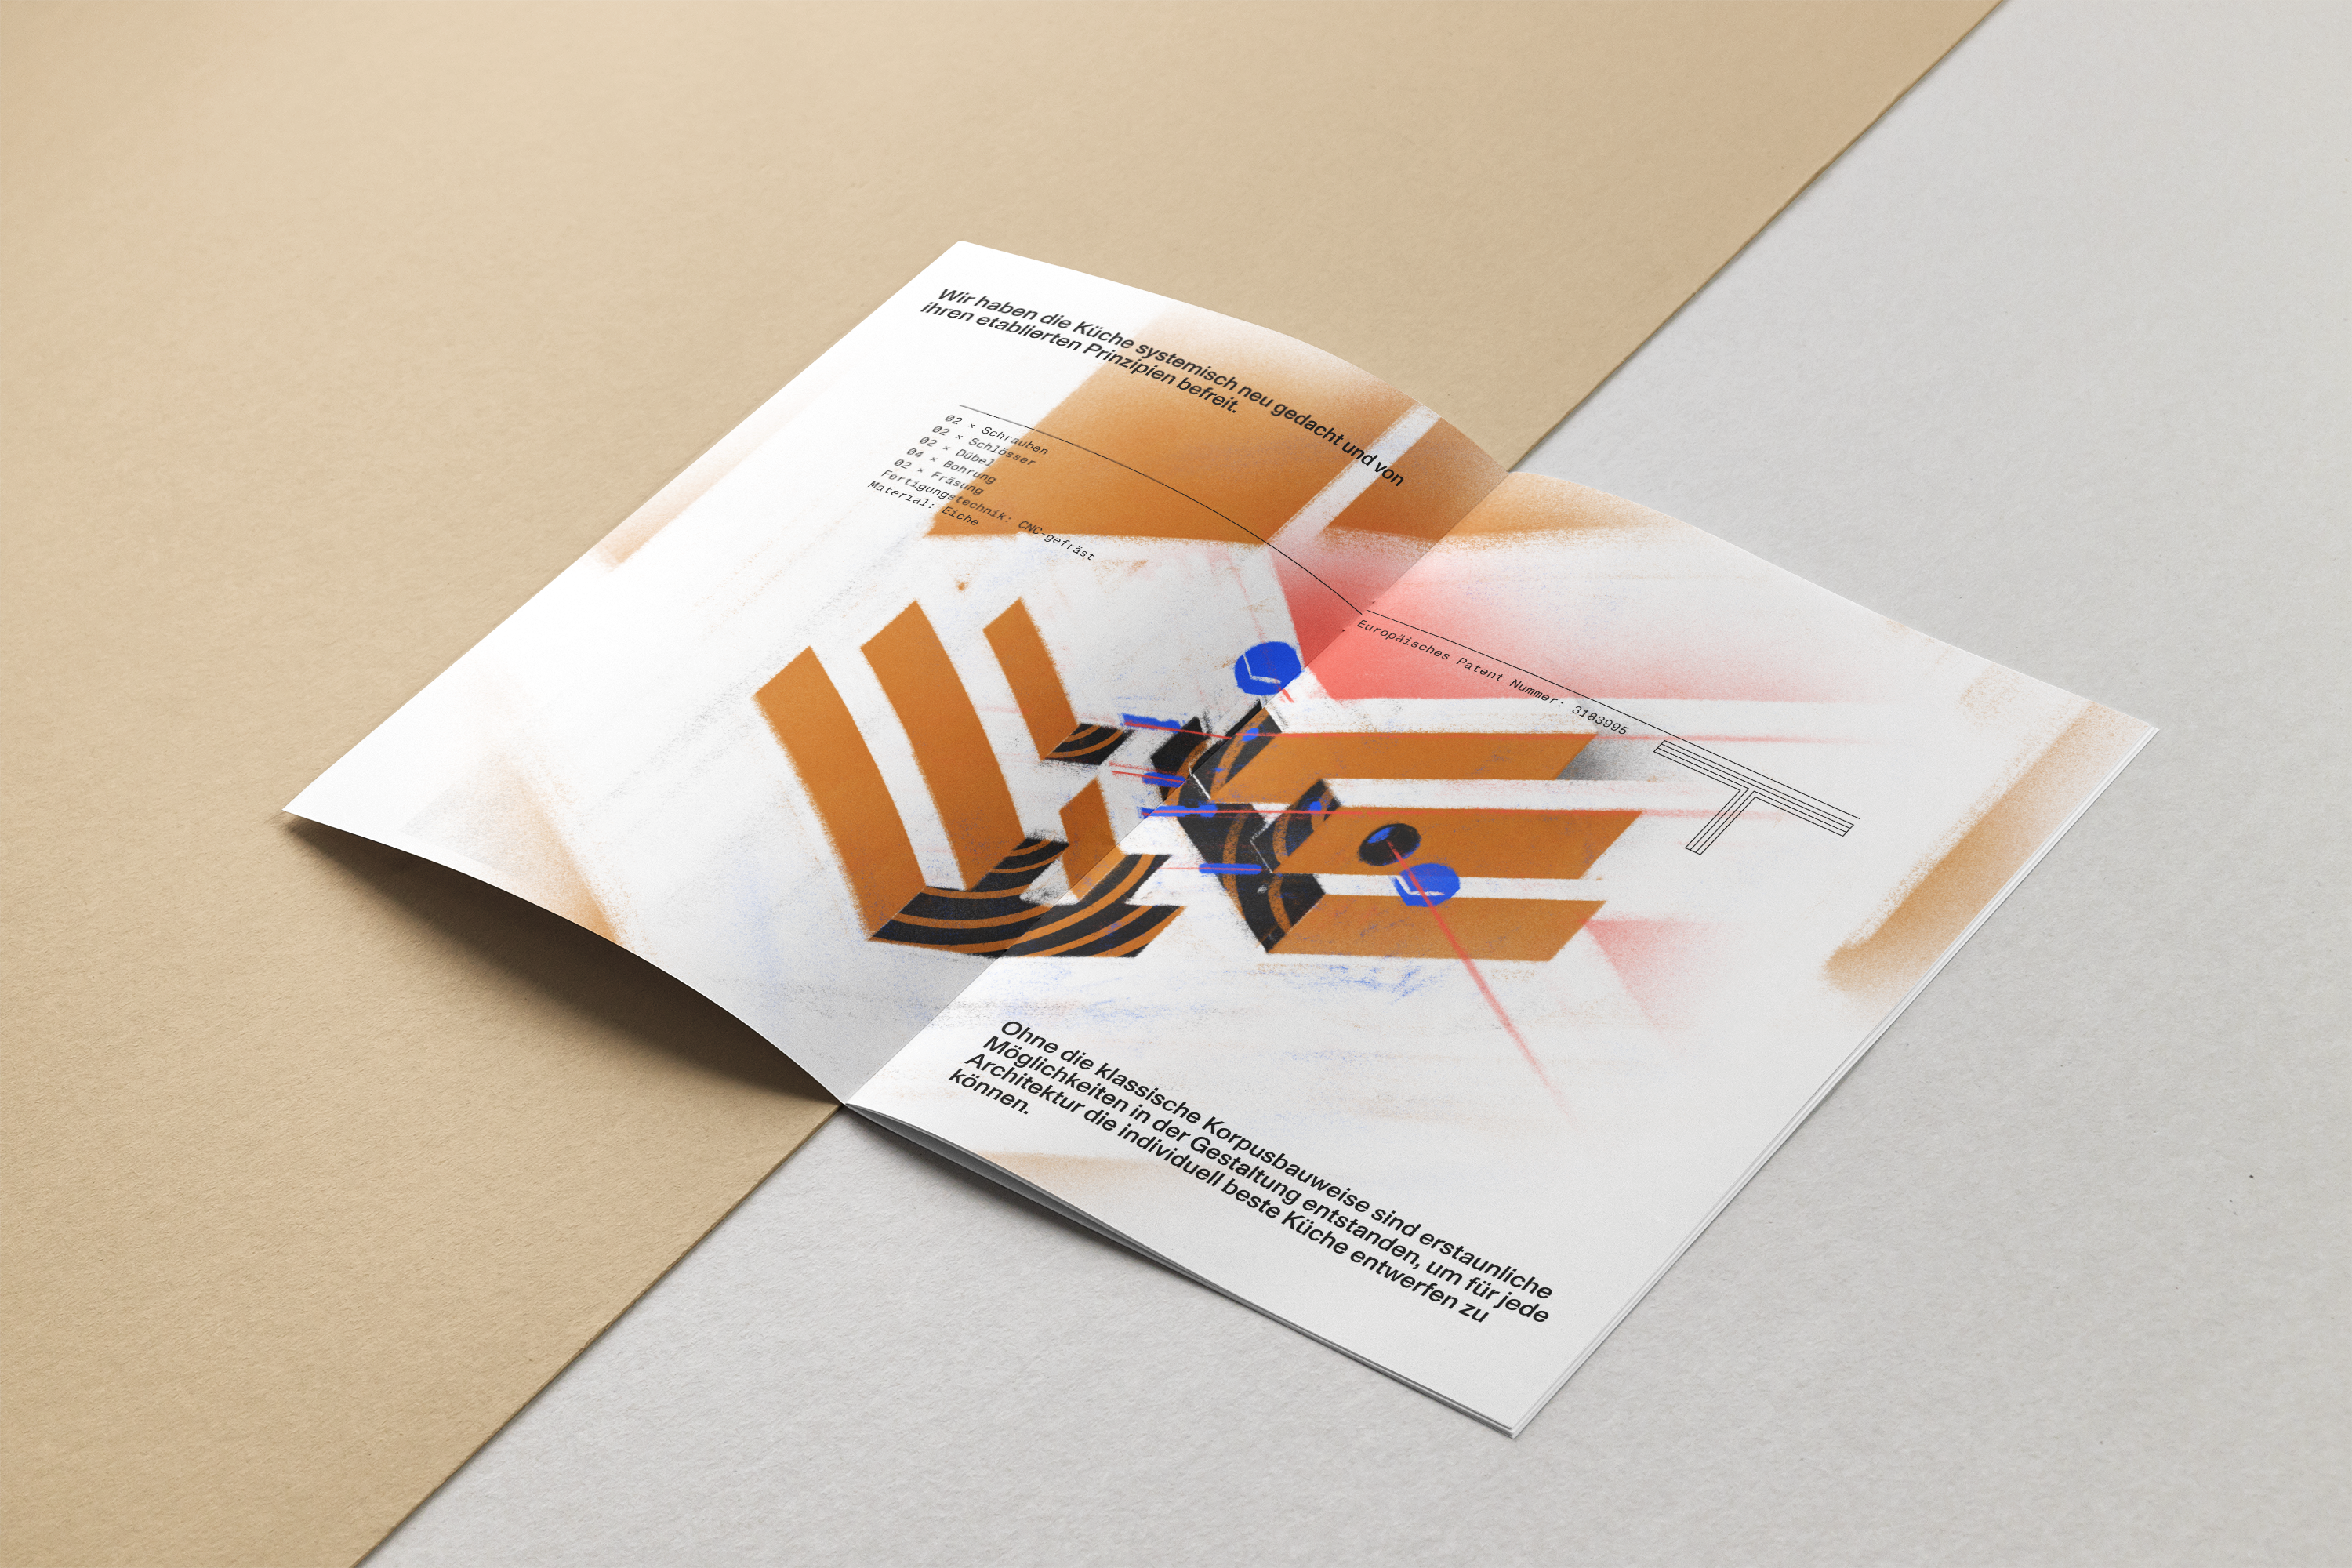 A design mockup of a brochure. It shows an open magazine with a double page spray style illustration of a the cross section of the main j*gast profile with its connection system. The main colors are warm brown, black and brown.